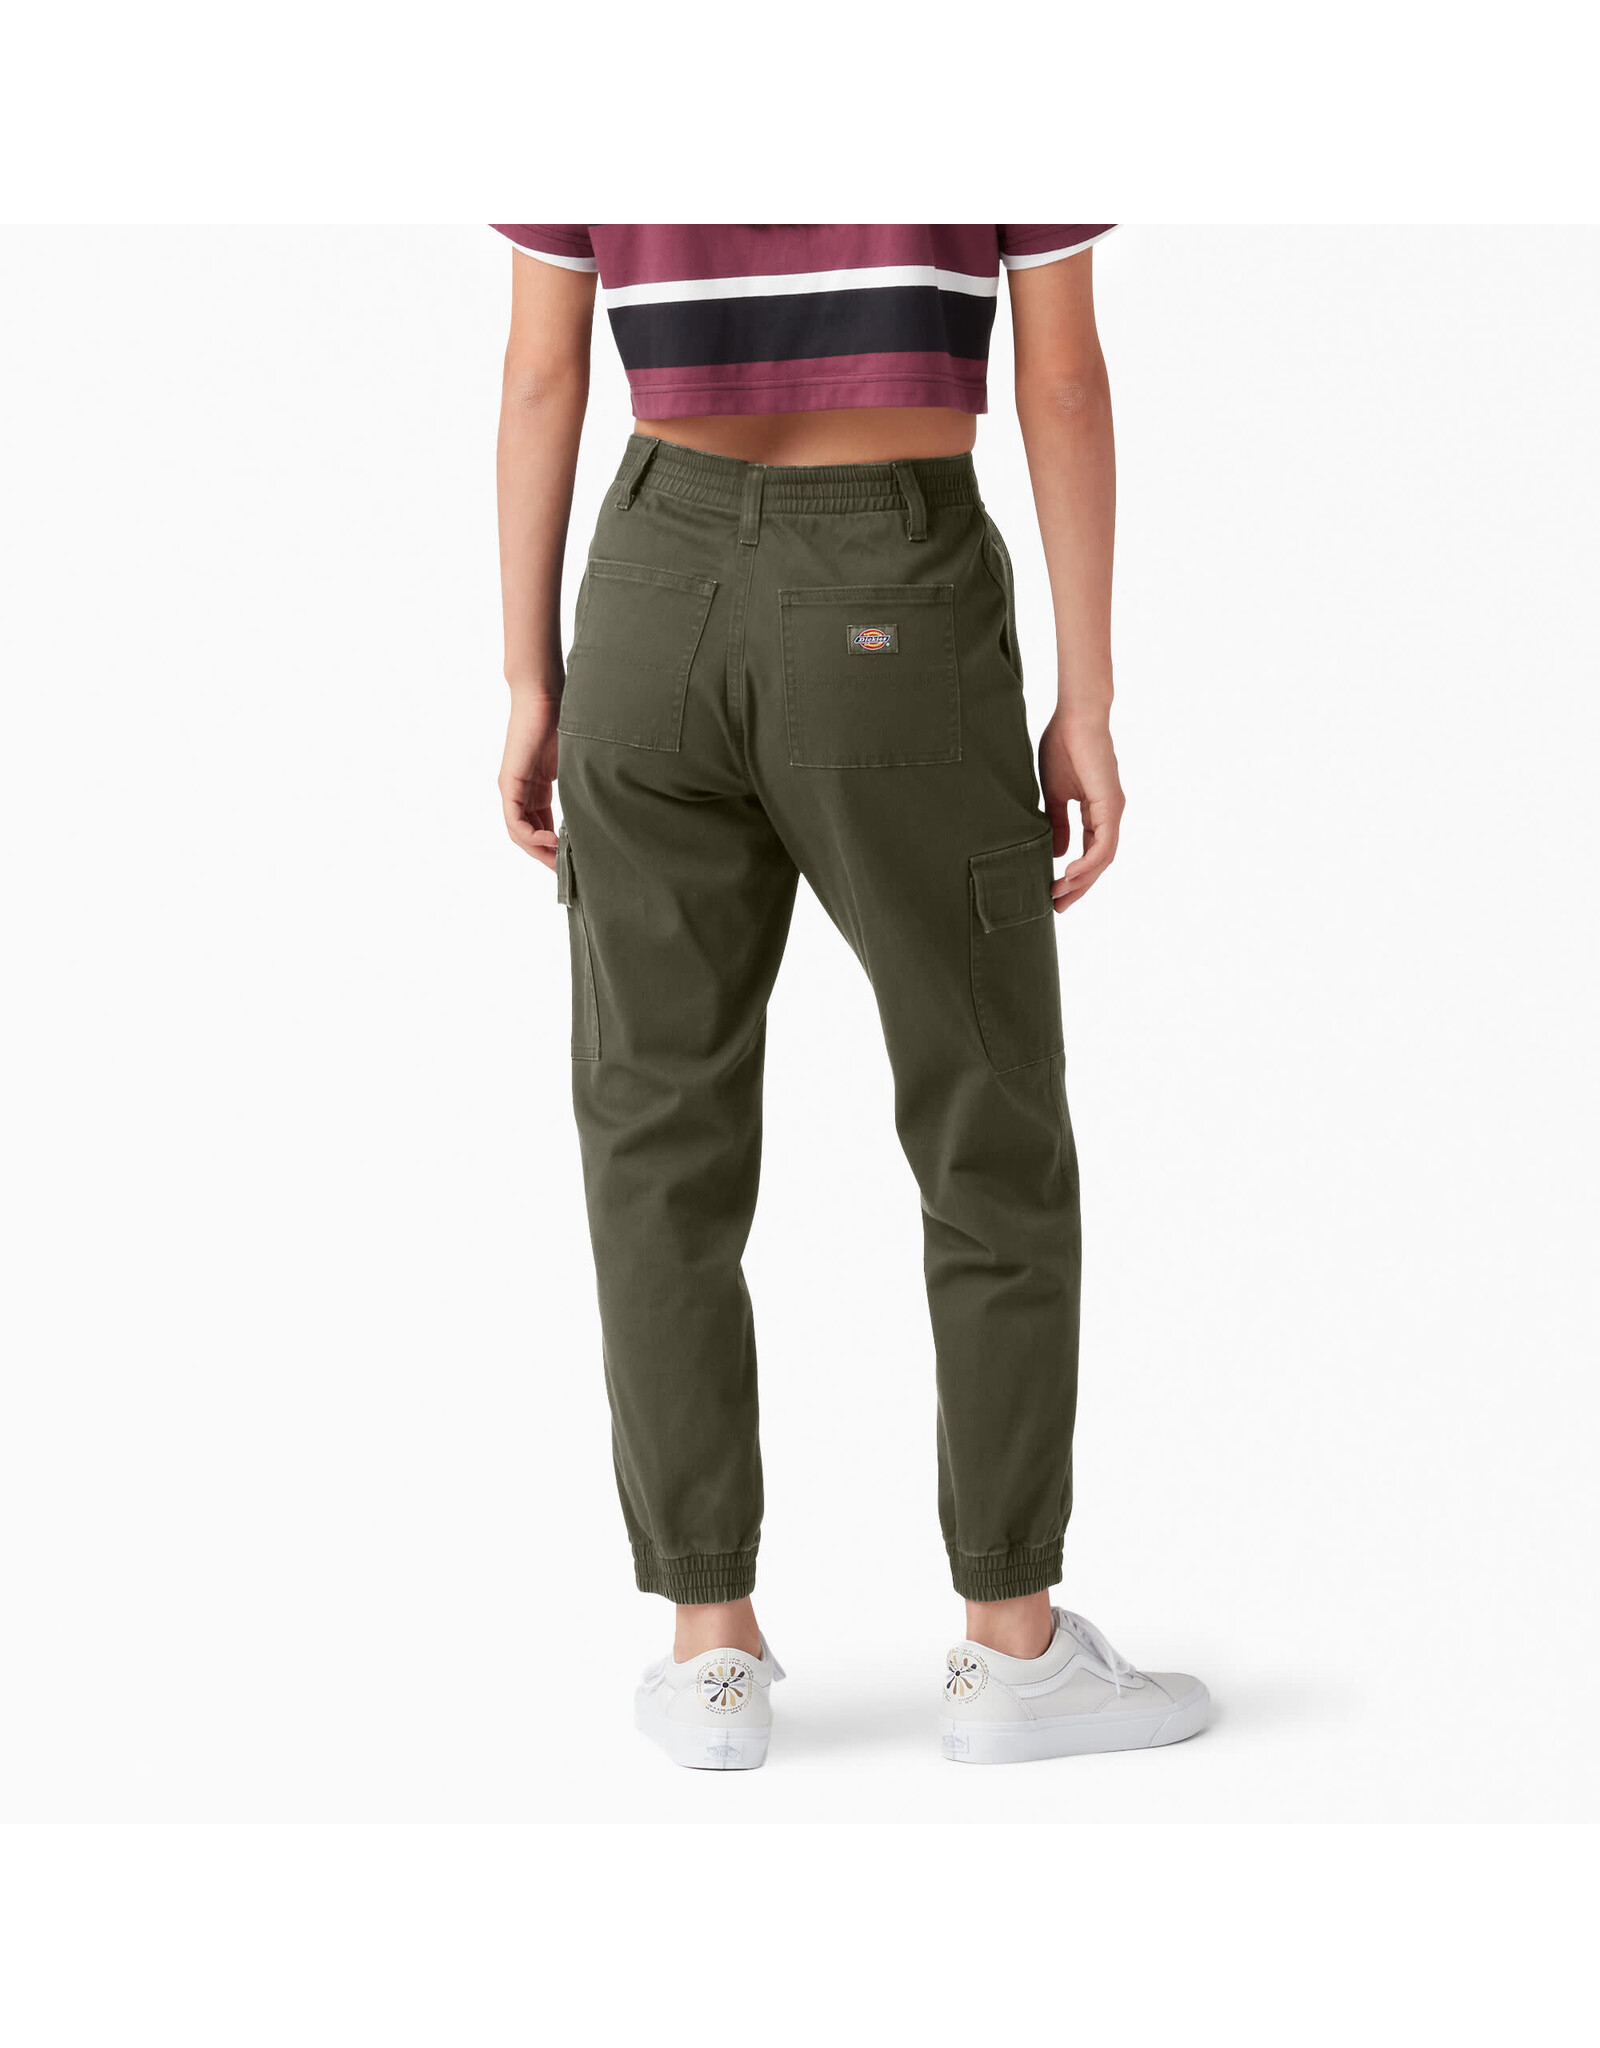 DICKIES Women's High Rise Fit Cargo Jogger Pants Miliary - FPR54ML